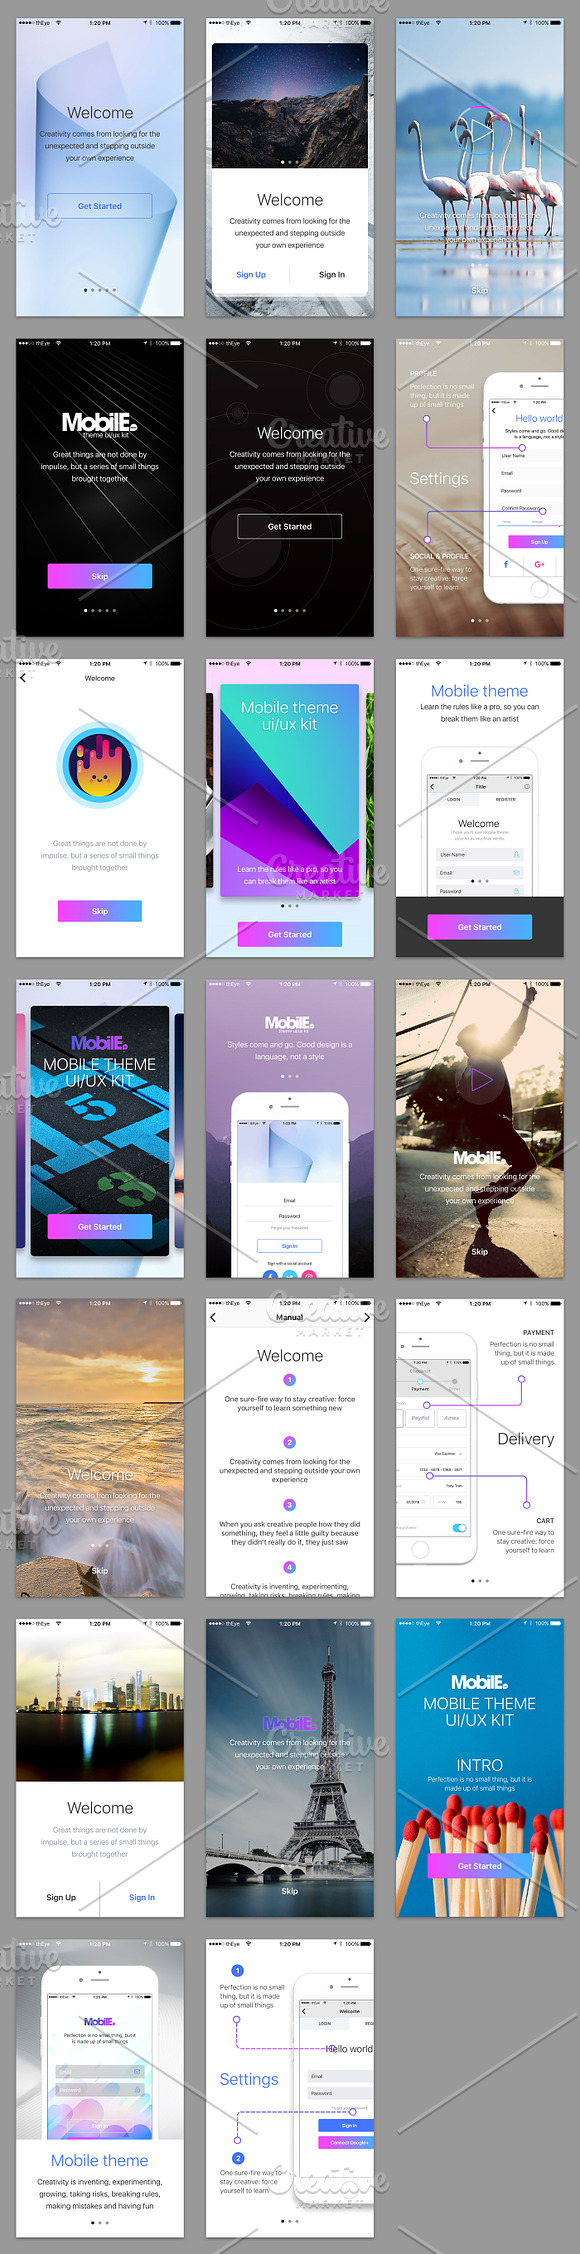 Mobile Theme UI/UX Kit in UI Kits and Libraries - product preview 3